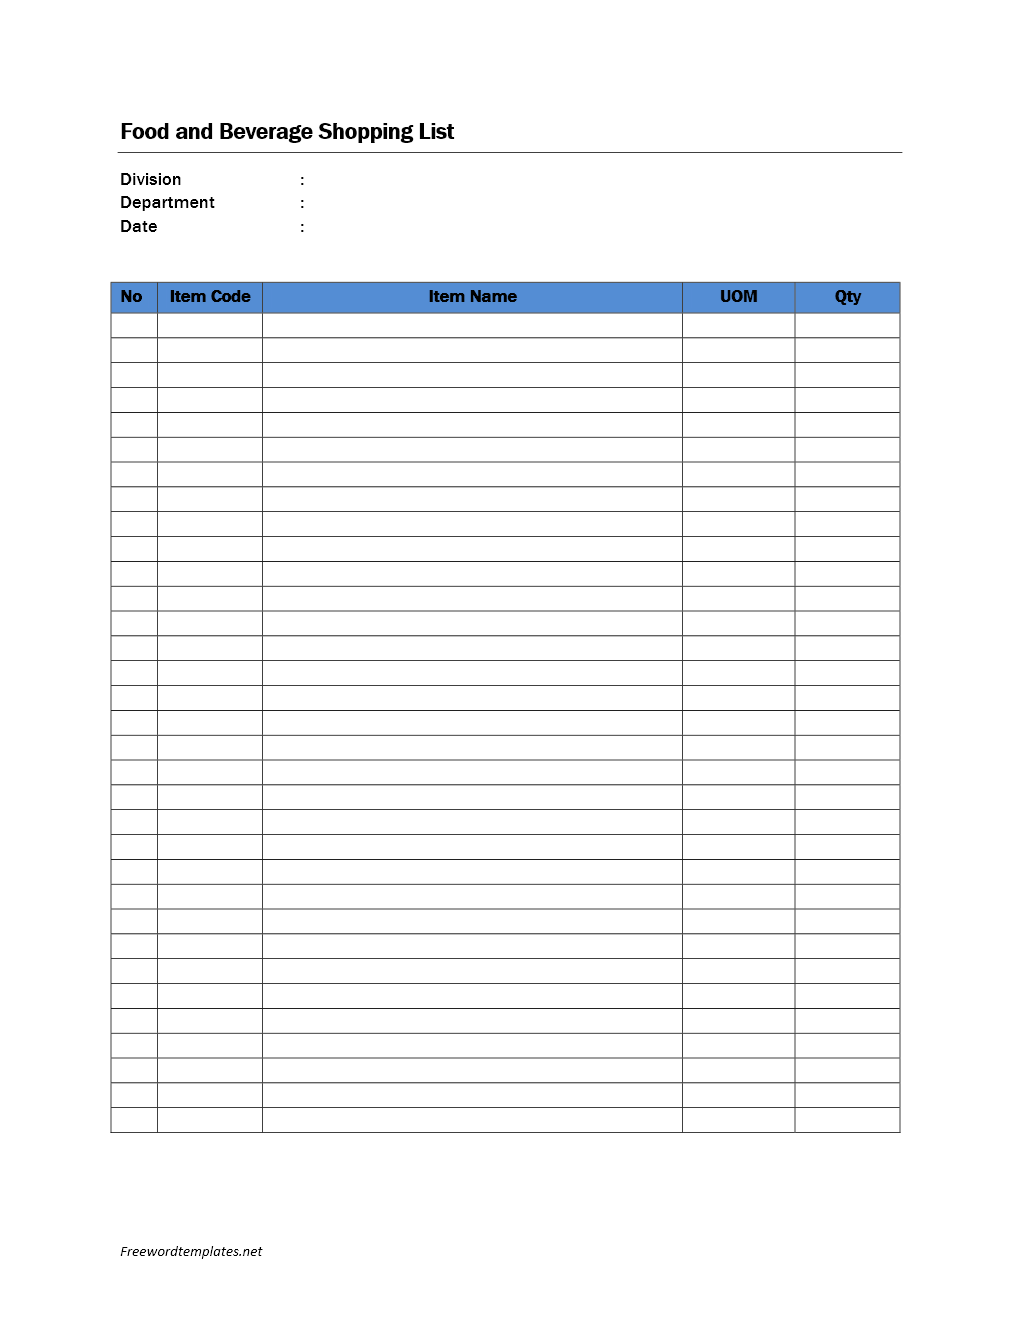 Food and Beverage Shopping List Template